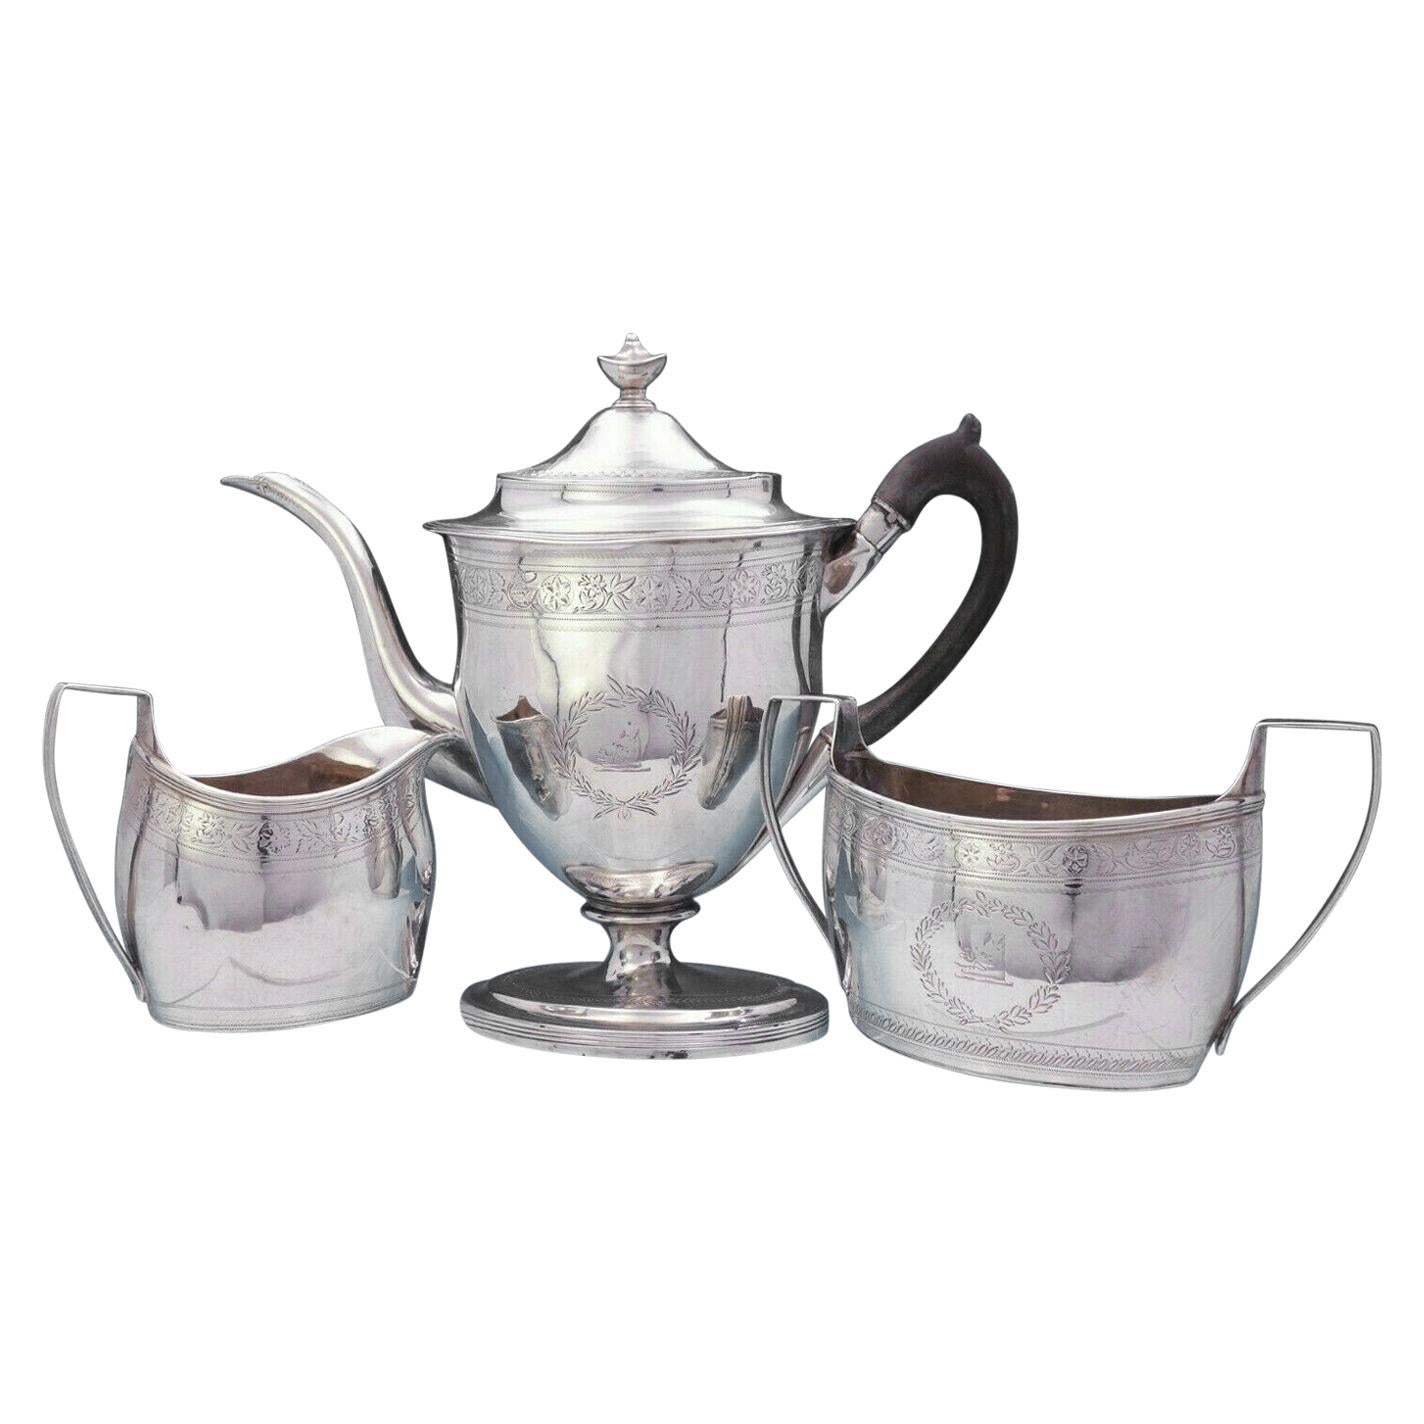 Robert and David Hennell English Georgian Sterling Silver Coffee Set 3-Piece